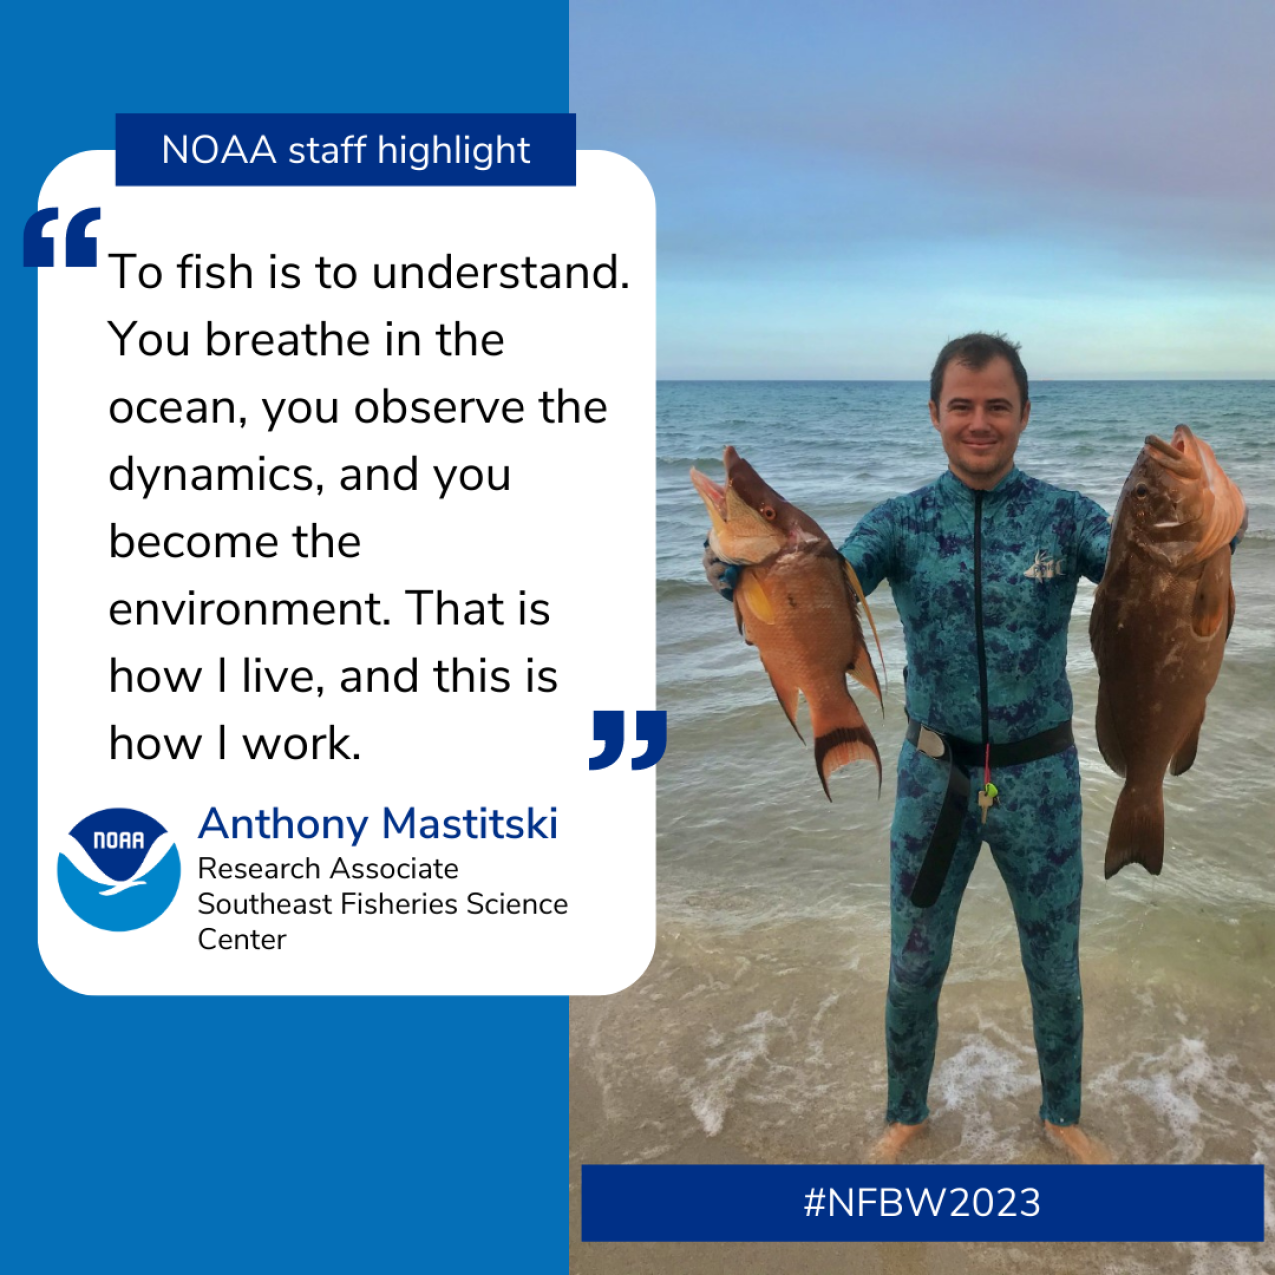 A quote alongside a photo of a man standing on the beach and smiling, holding up a fish in each hand. They are large, longer than his torso. The text reads: NOAA Staff highlight: “To fish is to understand. You breathe in the ocean, you observe the dynamics, and you become the environment. That is how I live, and this is how I work.” Anthony Mastitski Research Associate, Southeast Fisheries Science Center.